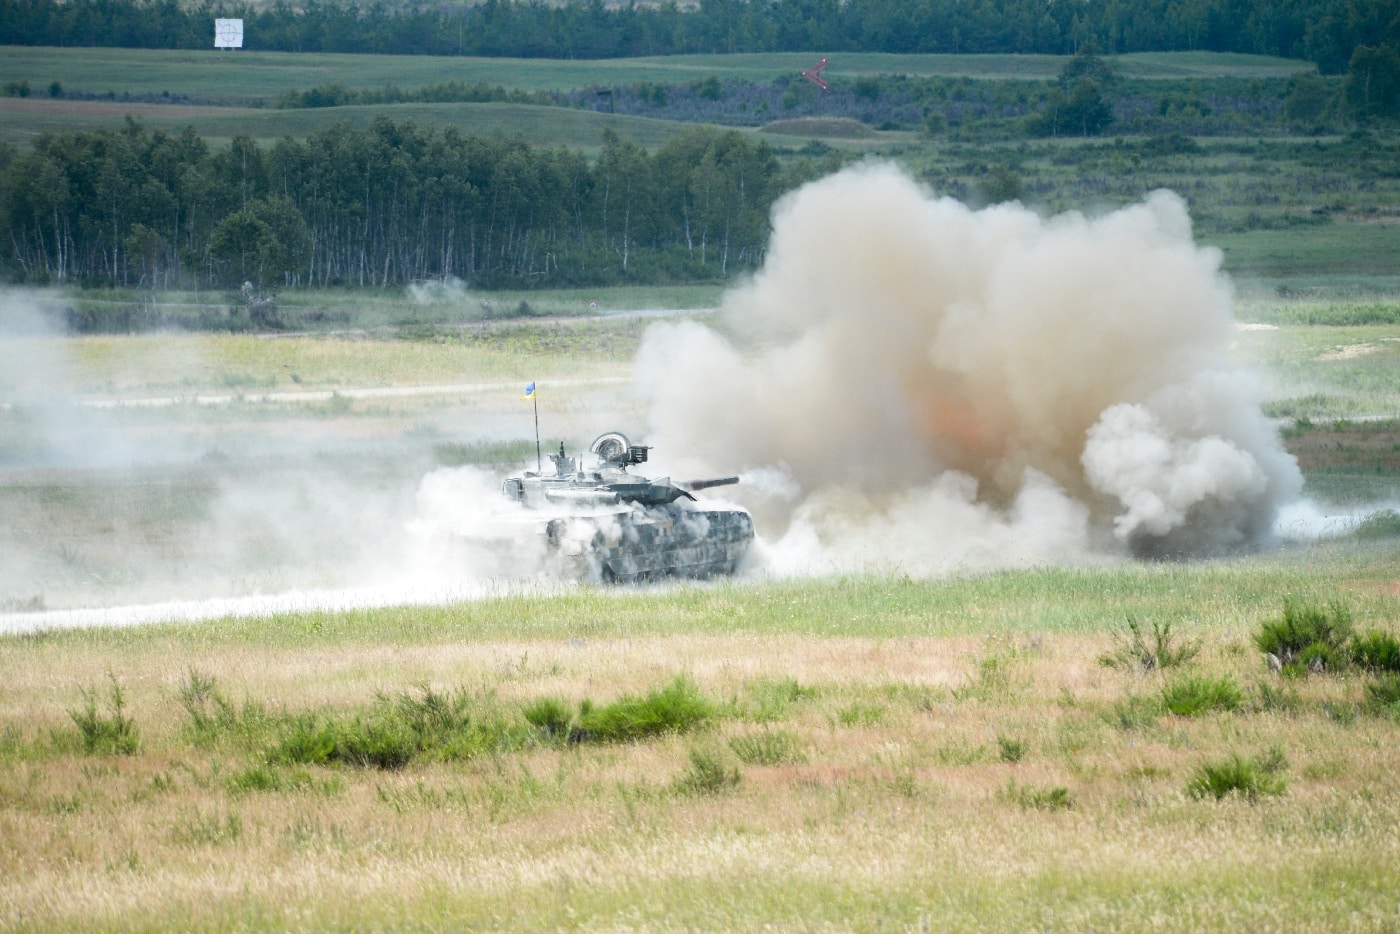 T-84 tank shoots while on the move during a training exercise. The T-84 offers many advantages over the T-80 series of tanks used by the Russian Federation and Soviet Union.